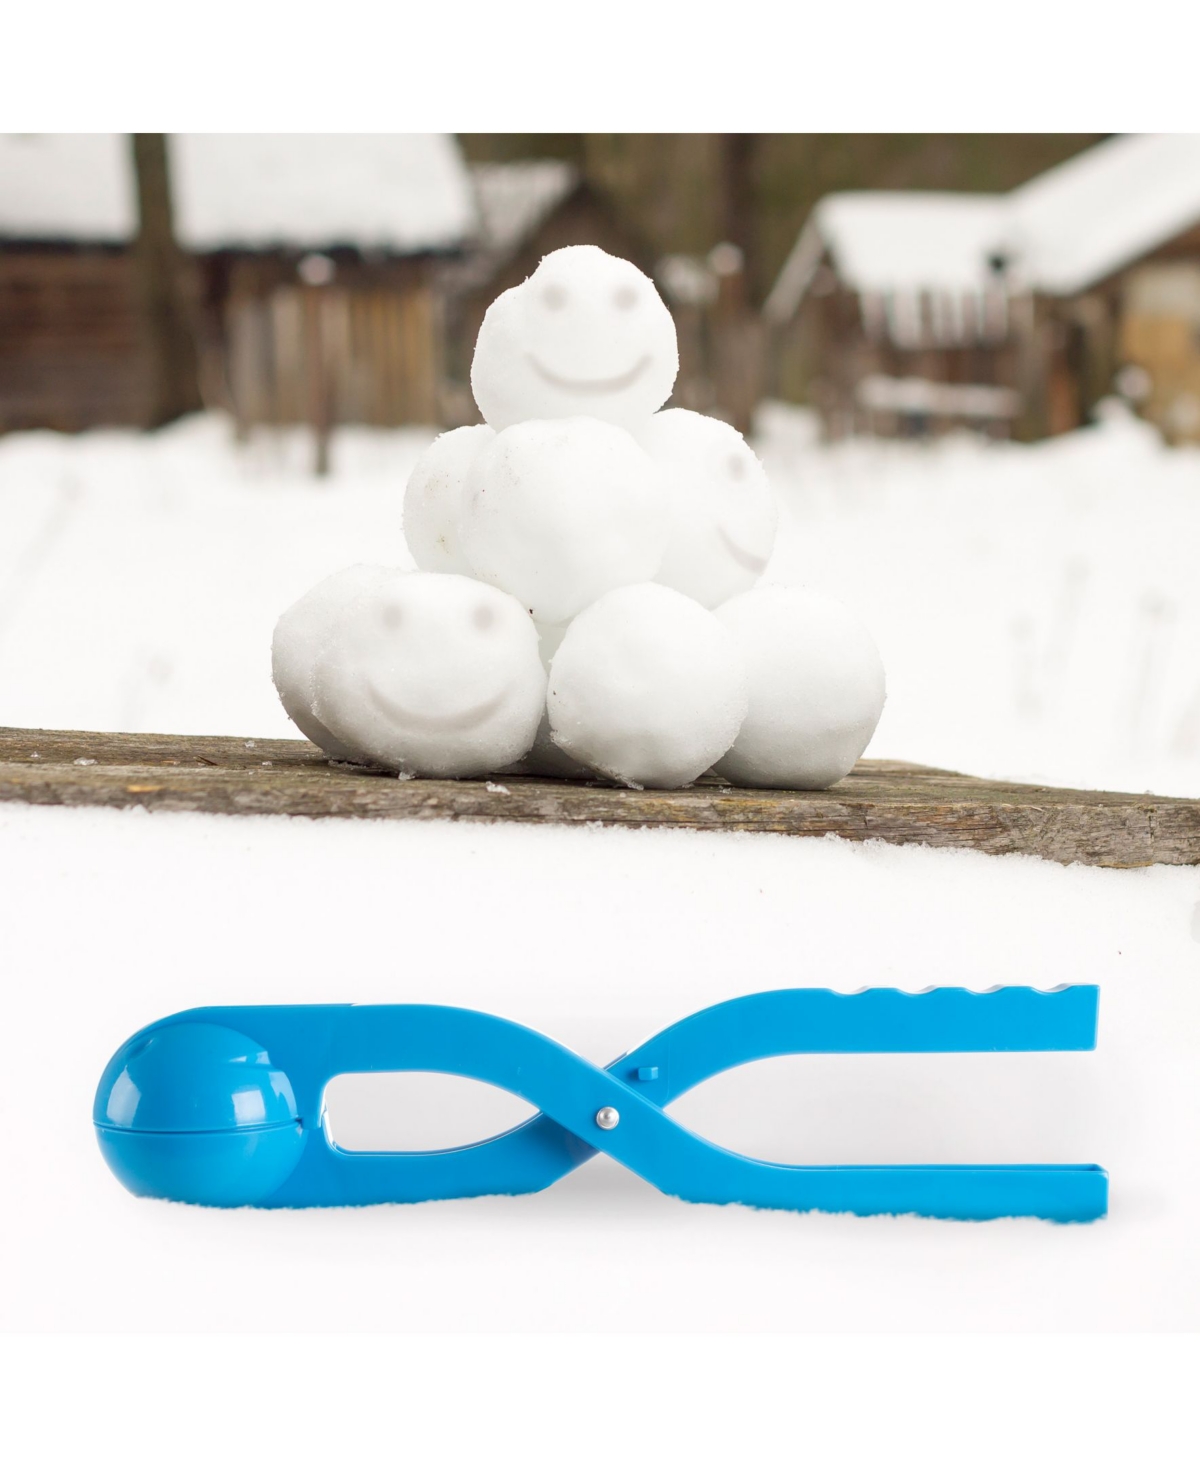 Shop Trademark Global Hey Play Snowball Maker Tool With Handle For Snow Ball Fights, Fun Winter Outdoor Activities And Mor In Multi